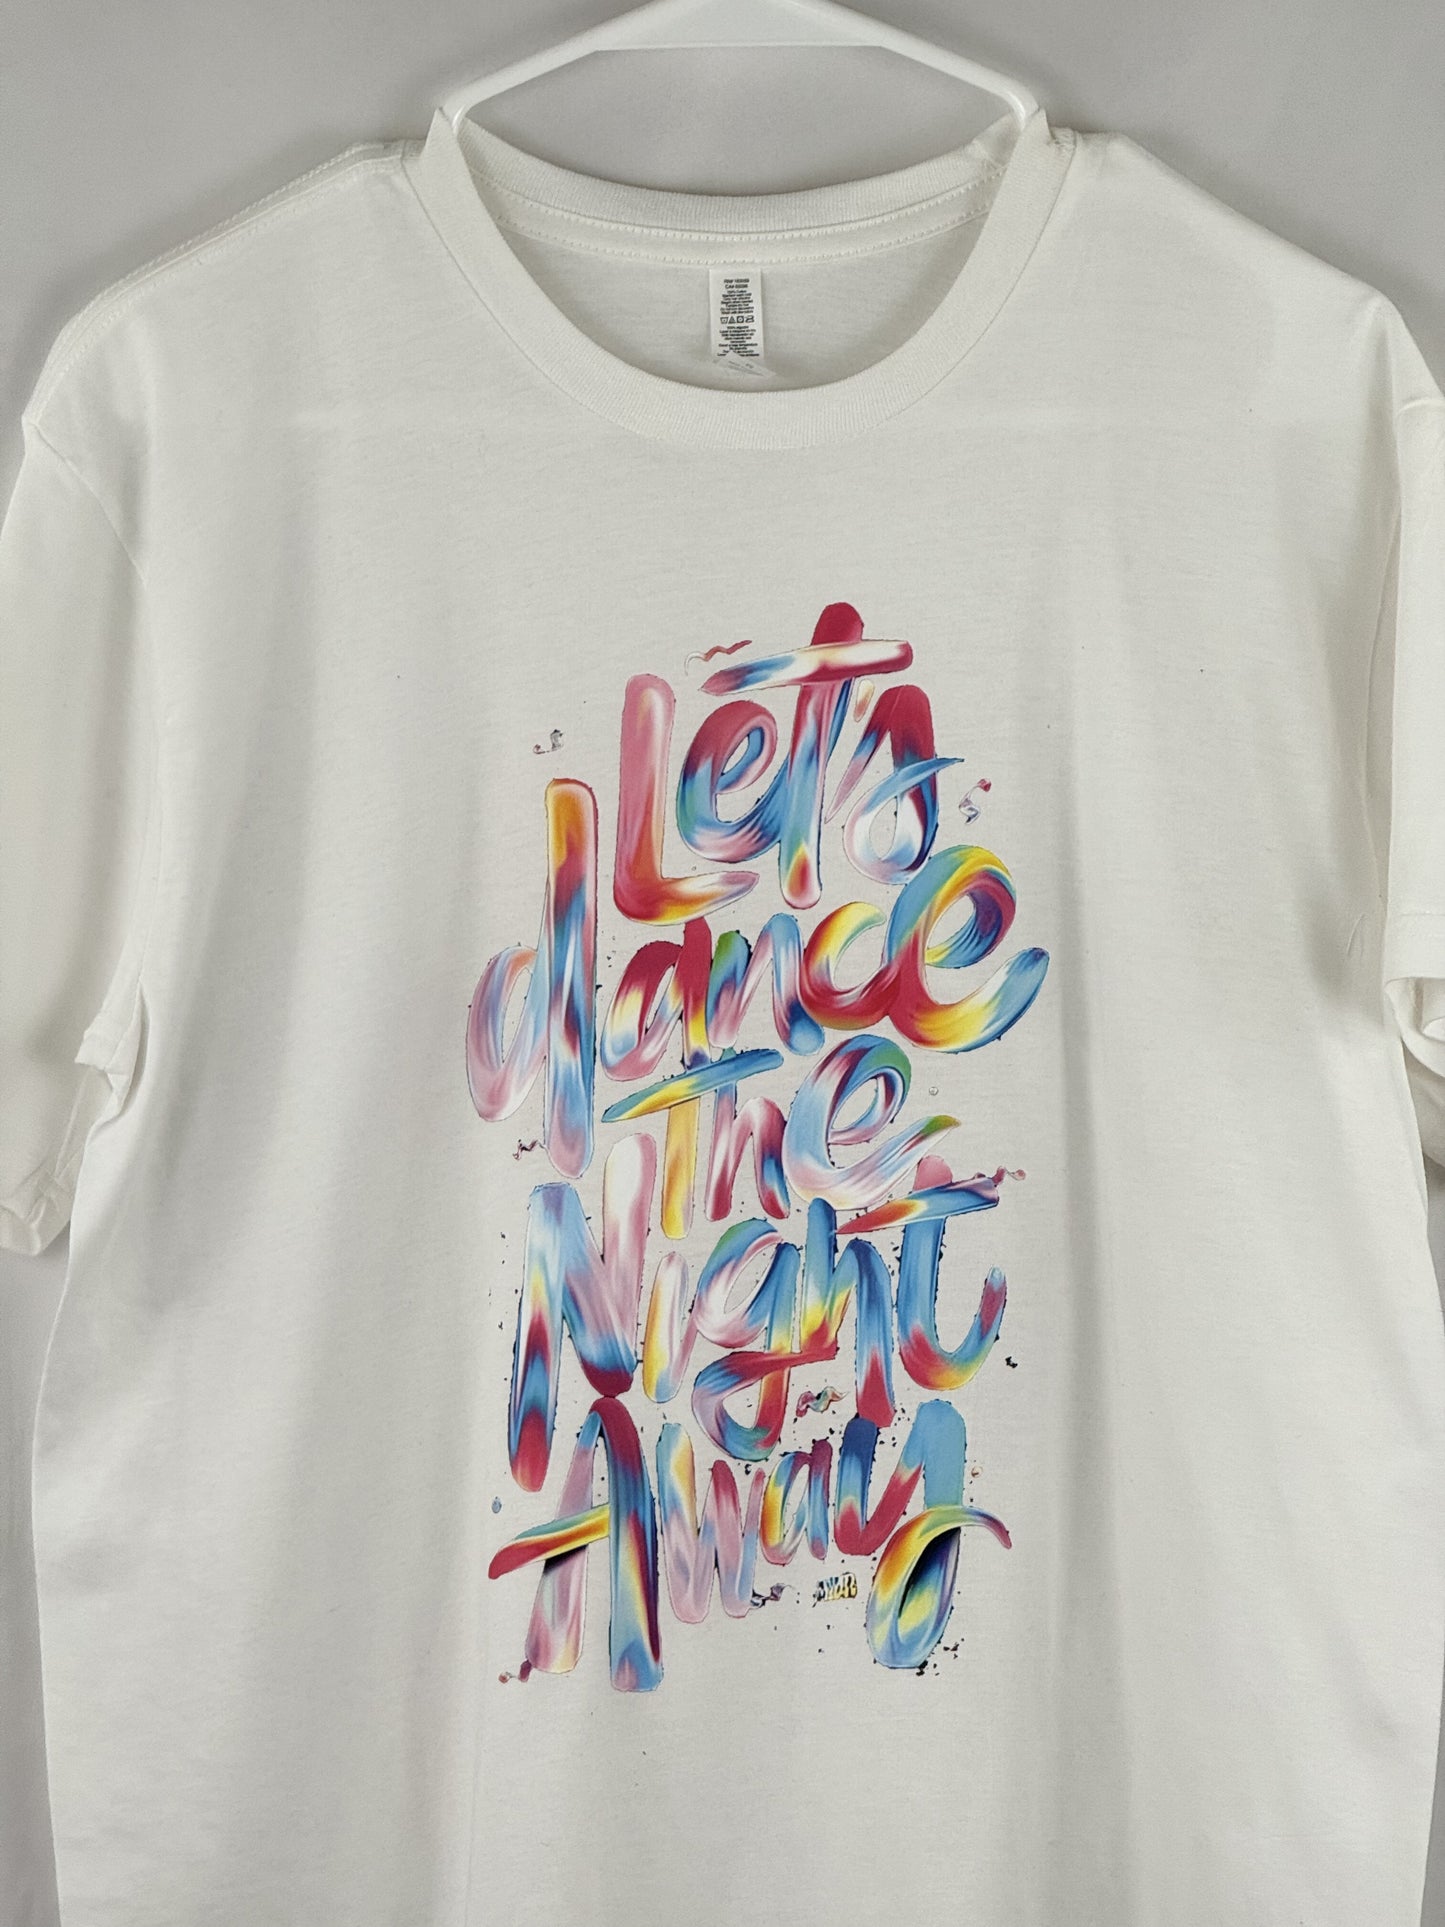 "Let's Dance the Night Away" T-Shirt